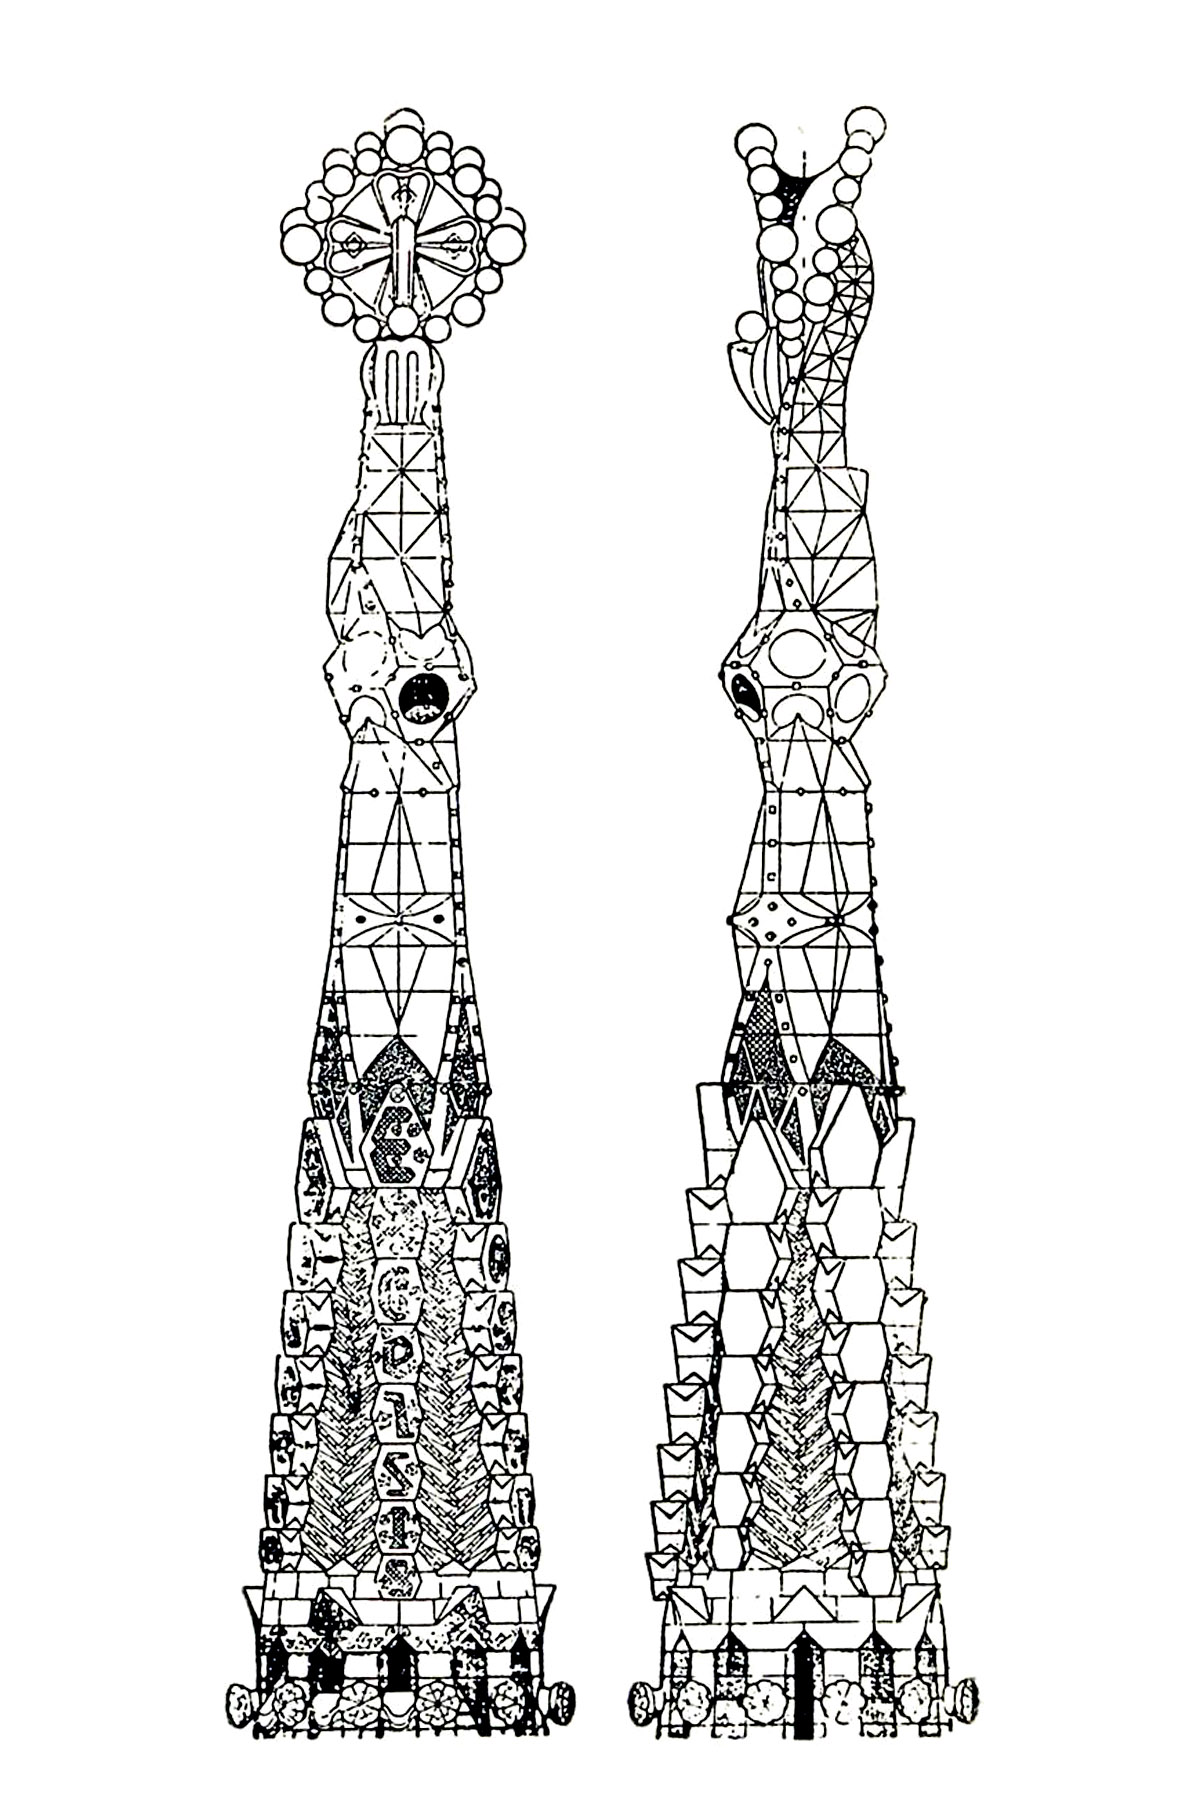 Drawing of two towers of the Sagrada Familia : the unfinished Cathedral by Gaudi